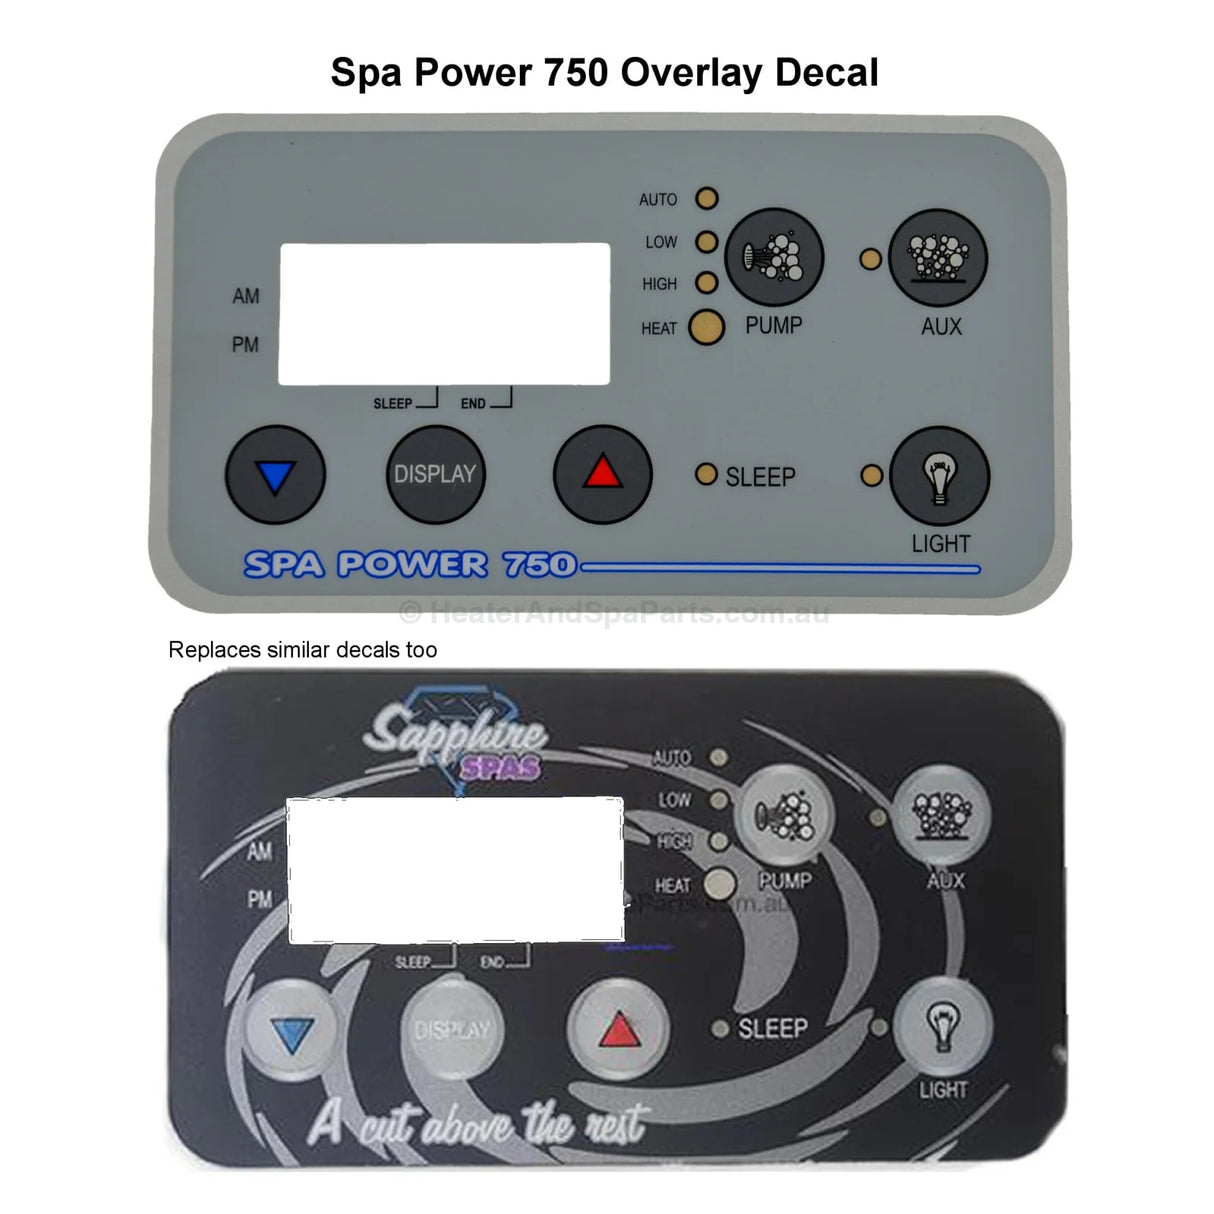 Spaquip Spa Power 750 Touchpad Control Panel Keypad - Overlay Decal Sticker - Heater and Spa Parts